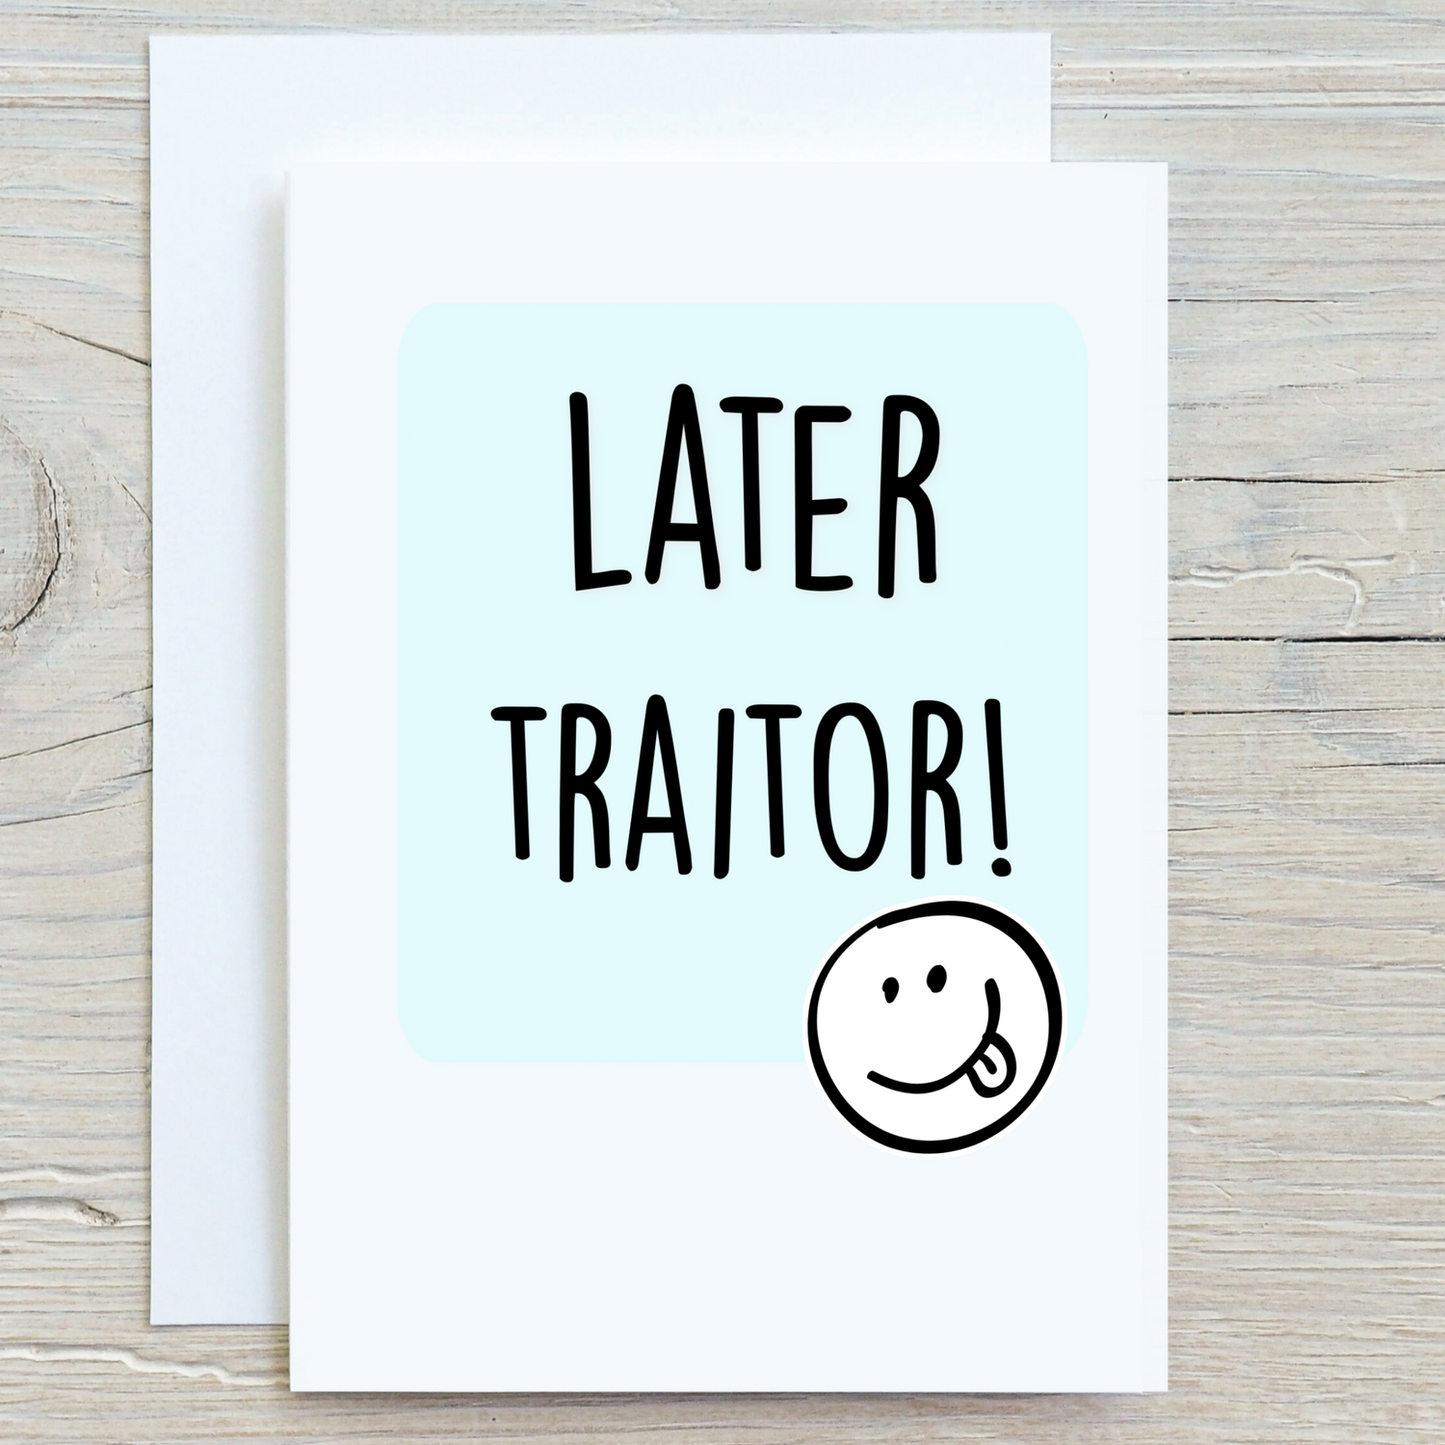 Later Traitor Greeting Card